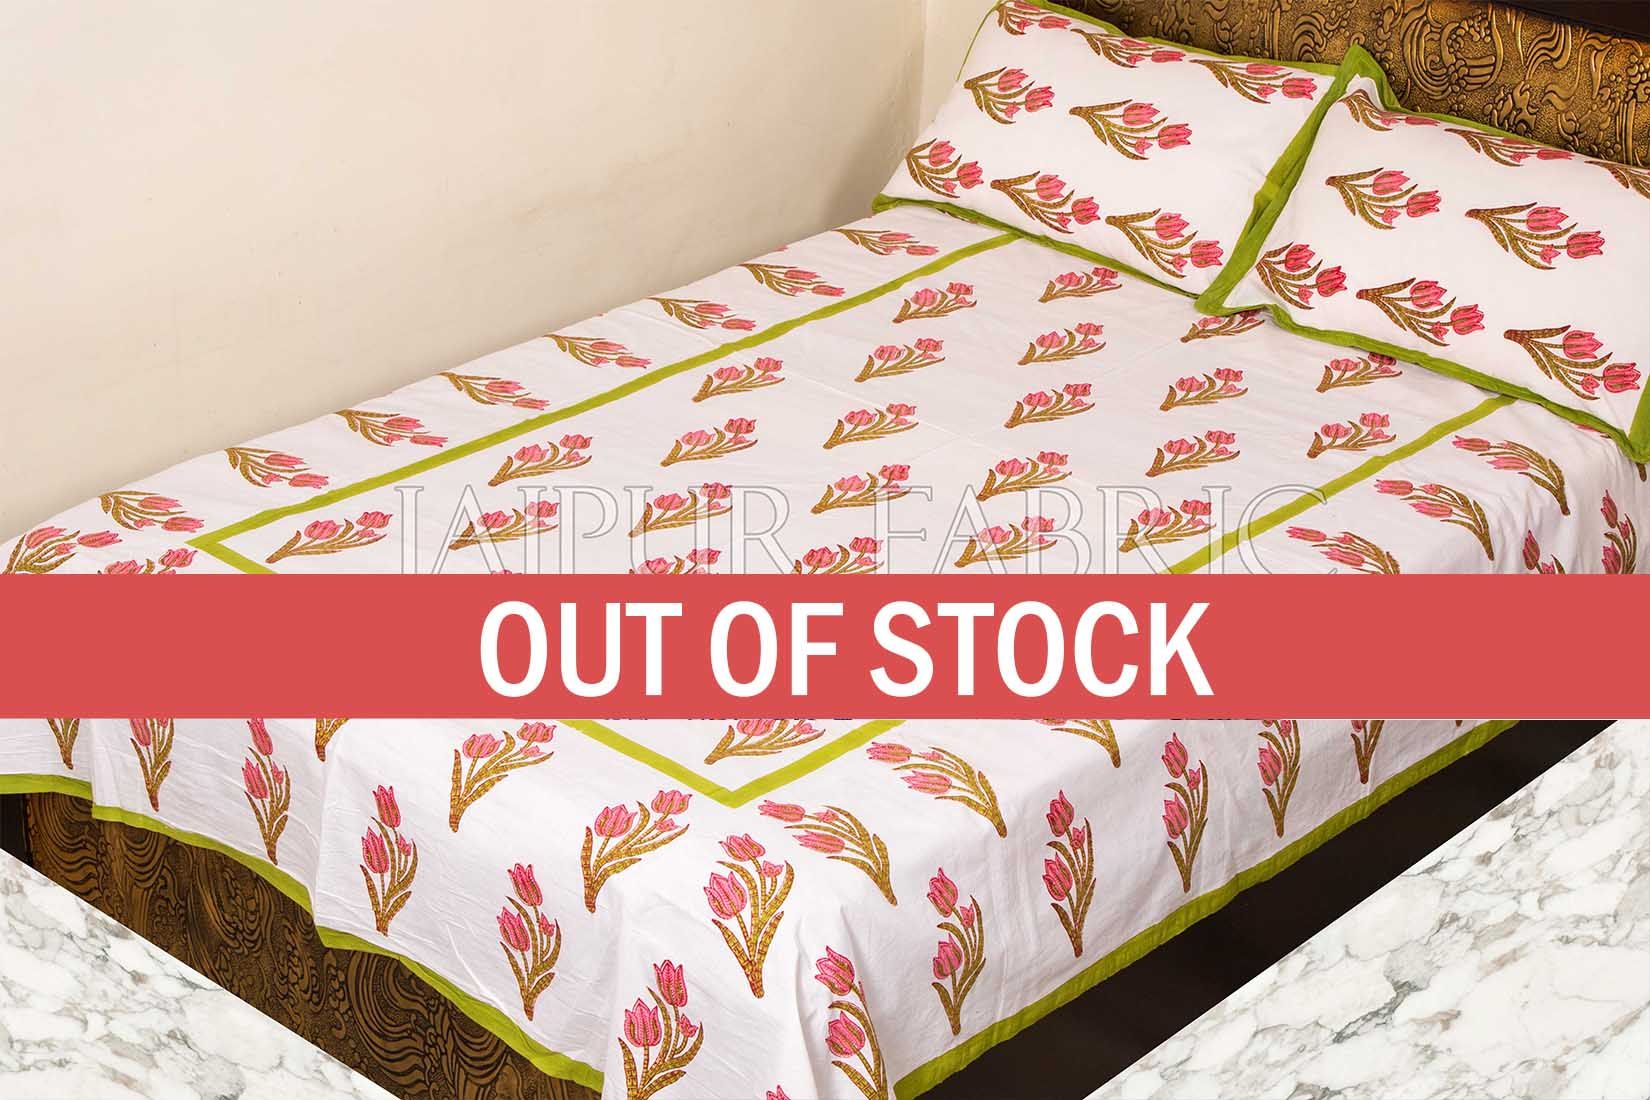 Green Border White Base Pink Flower Handmade Block Print Single Bed Sheet with Two Pillow Covers